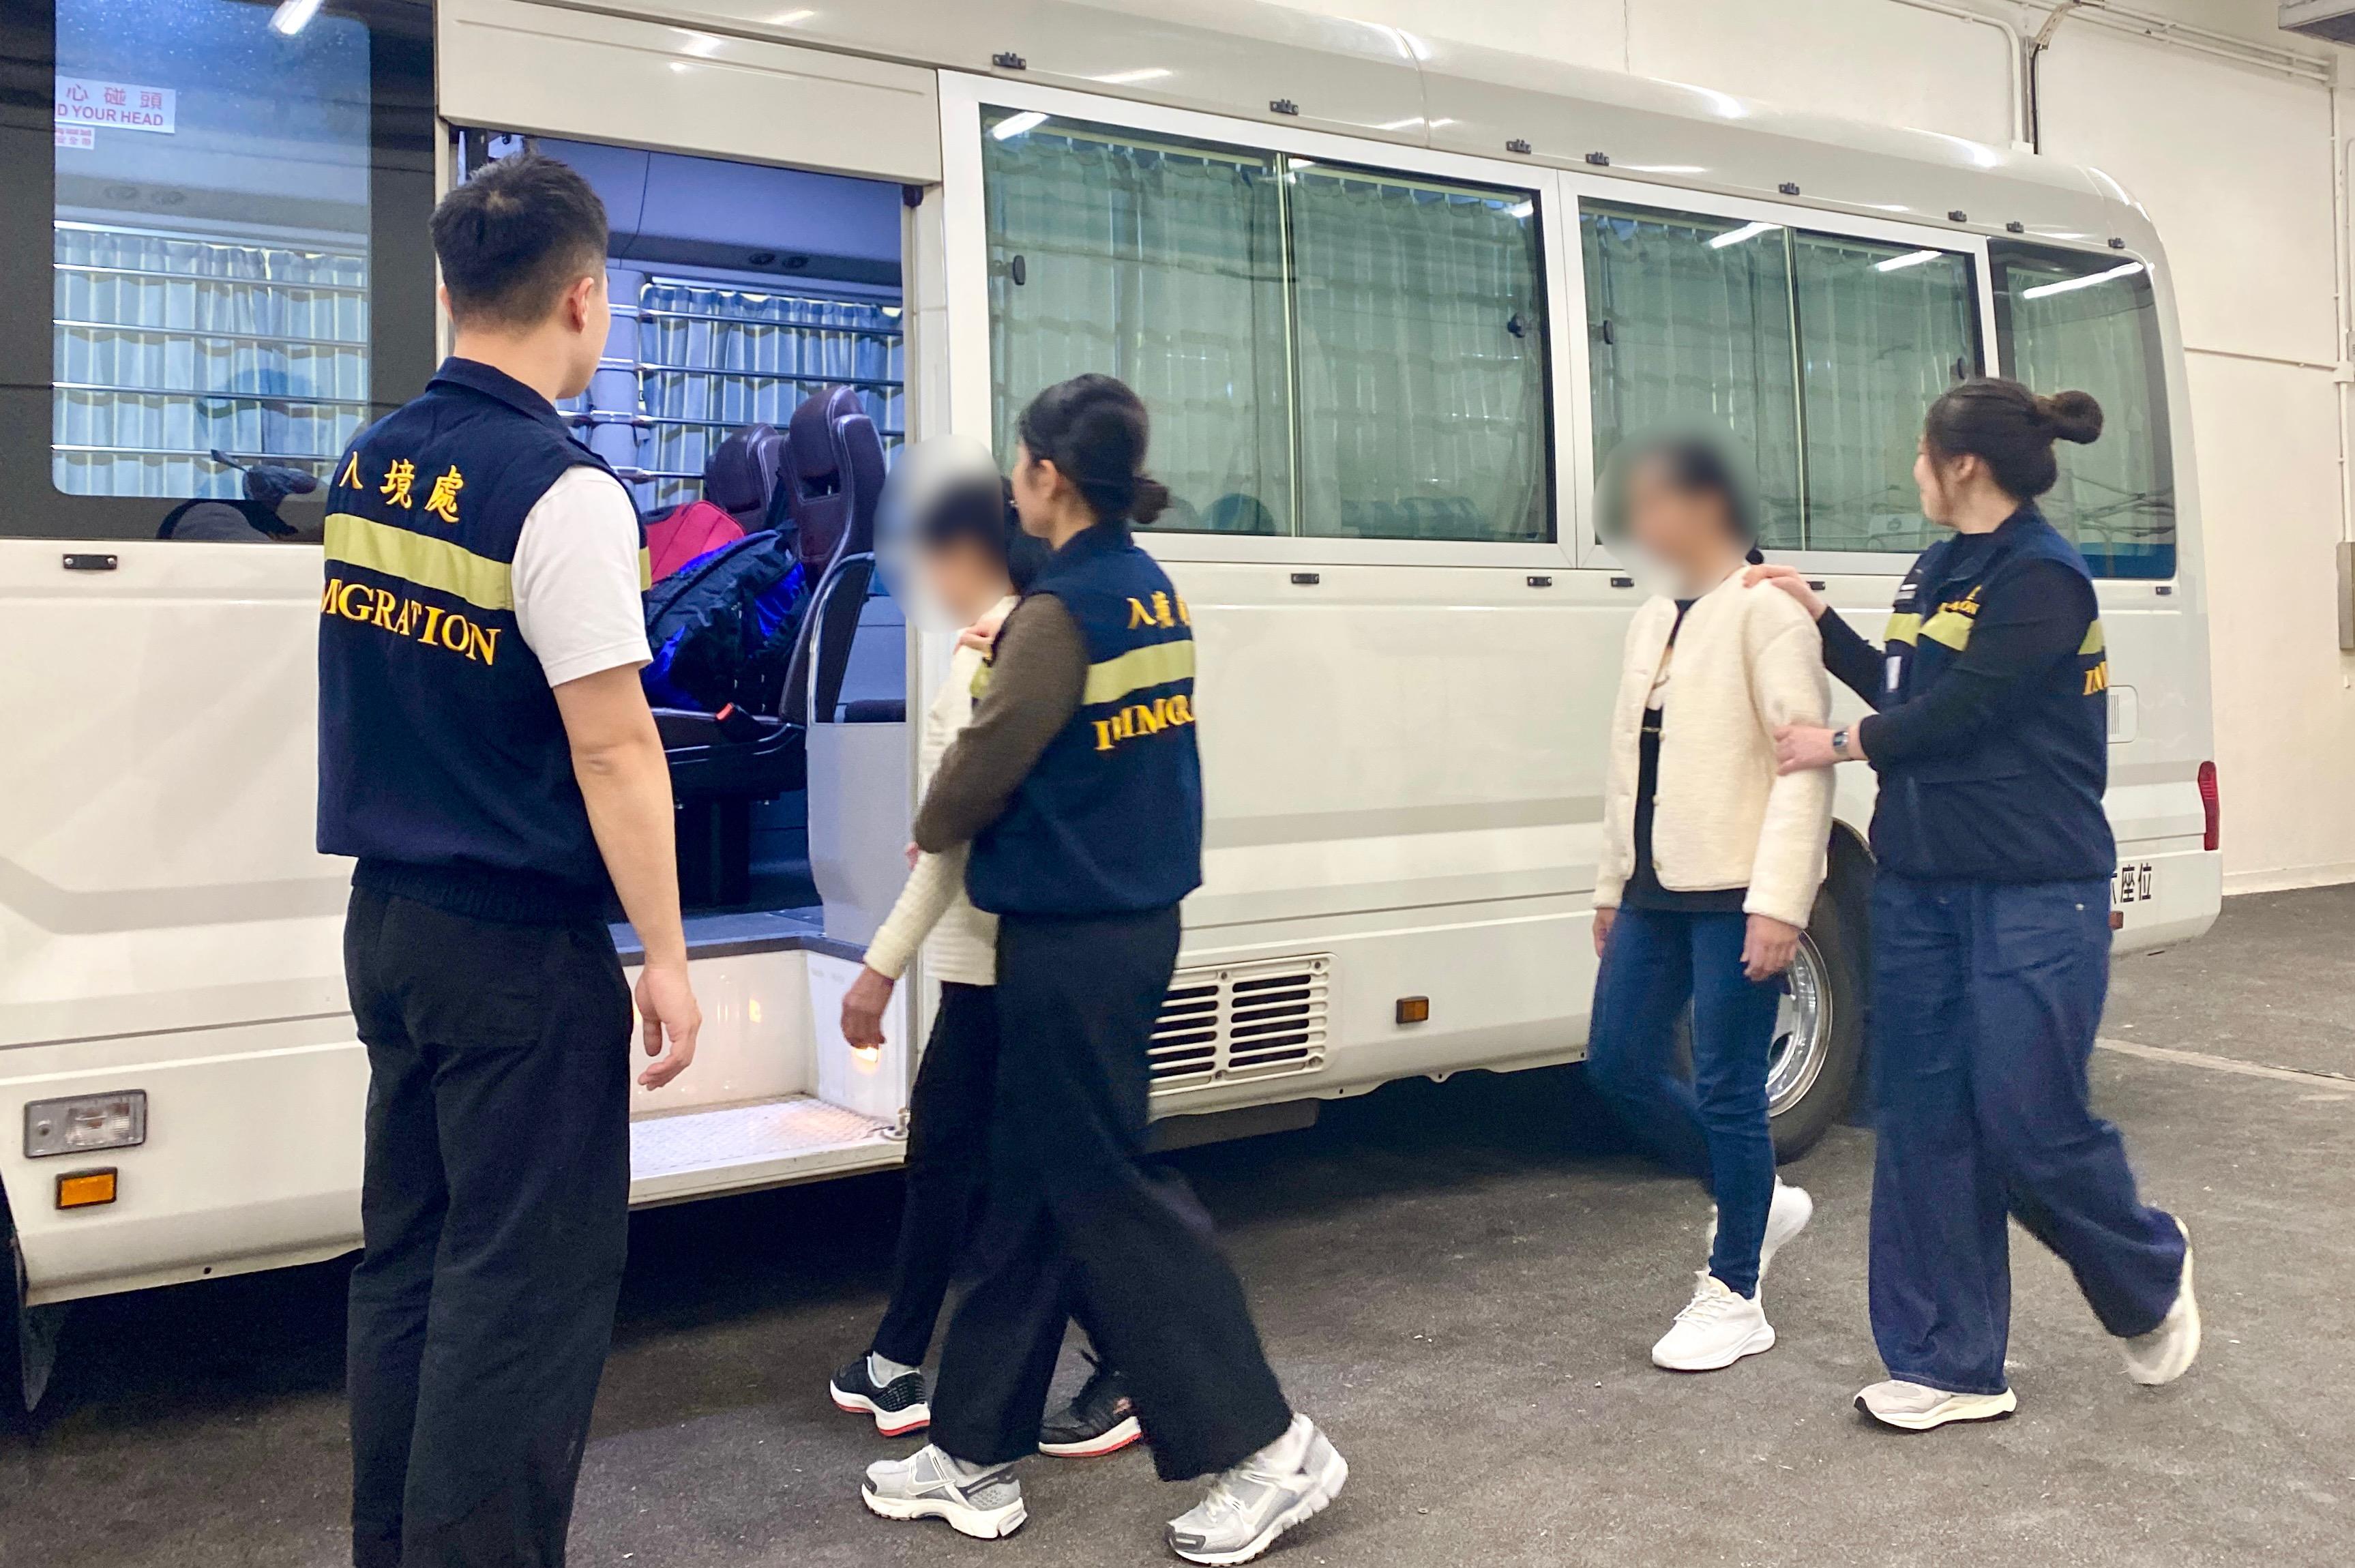 The Immigration Department (ImmD) carried out a repatriation operation today (November 29). A total of 24 Vietnamese illegal immigrants were repatriated to Vietnam. Photo shows removees being escorted by ImmD officers to proceed from the detention place to the airport.